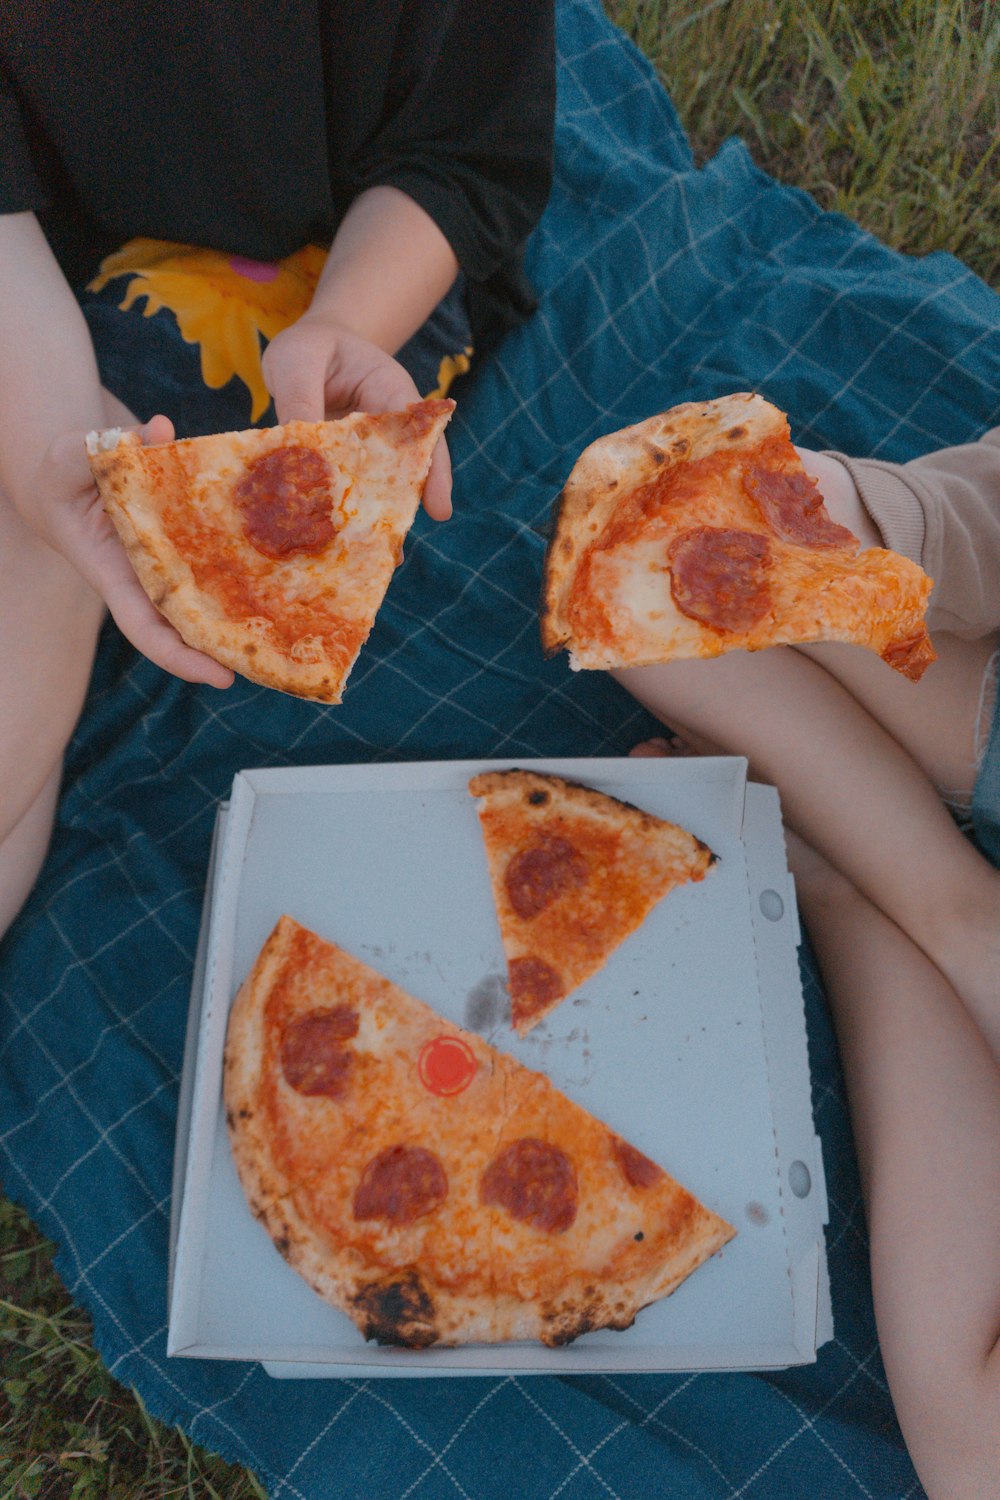 a person sitting on a blanket holding two slices of pizza